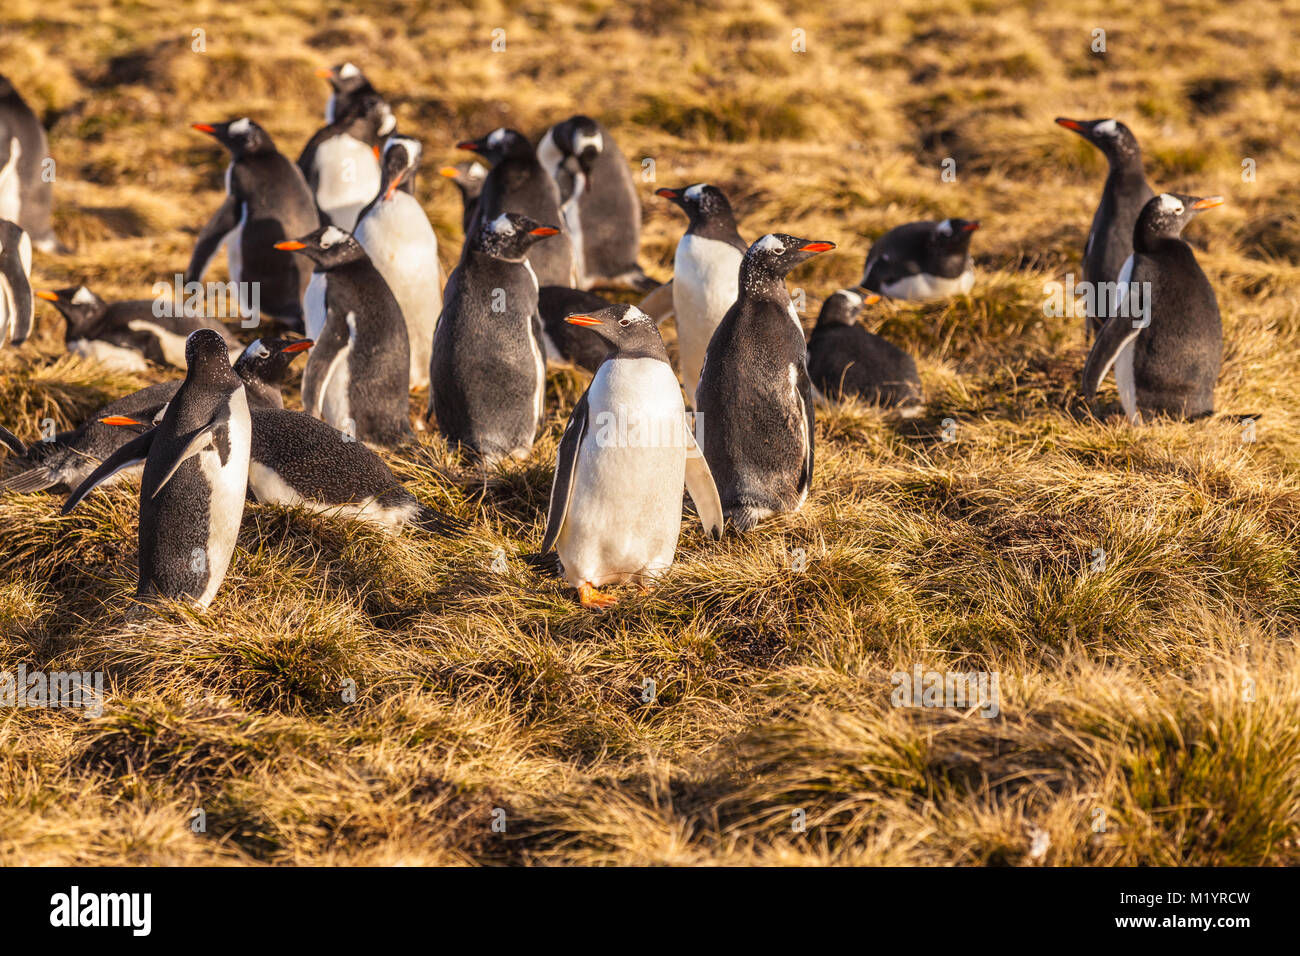 Gentoo Penguin colony, nesting on grass in the Falkland Islands Stock Photo